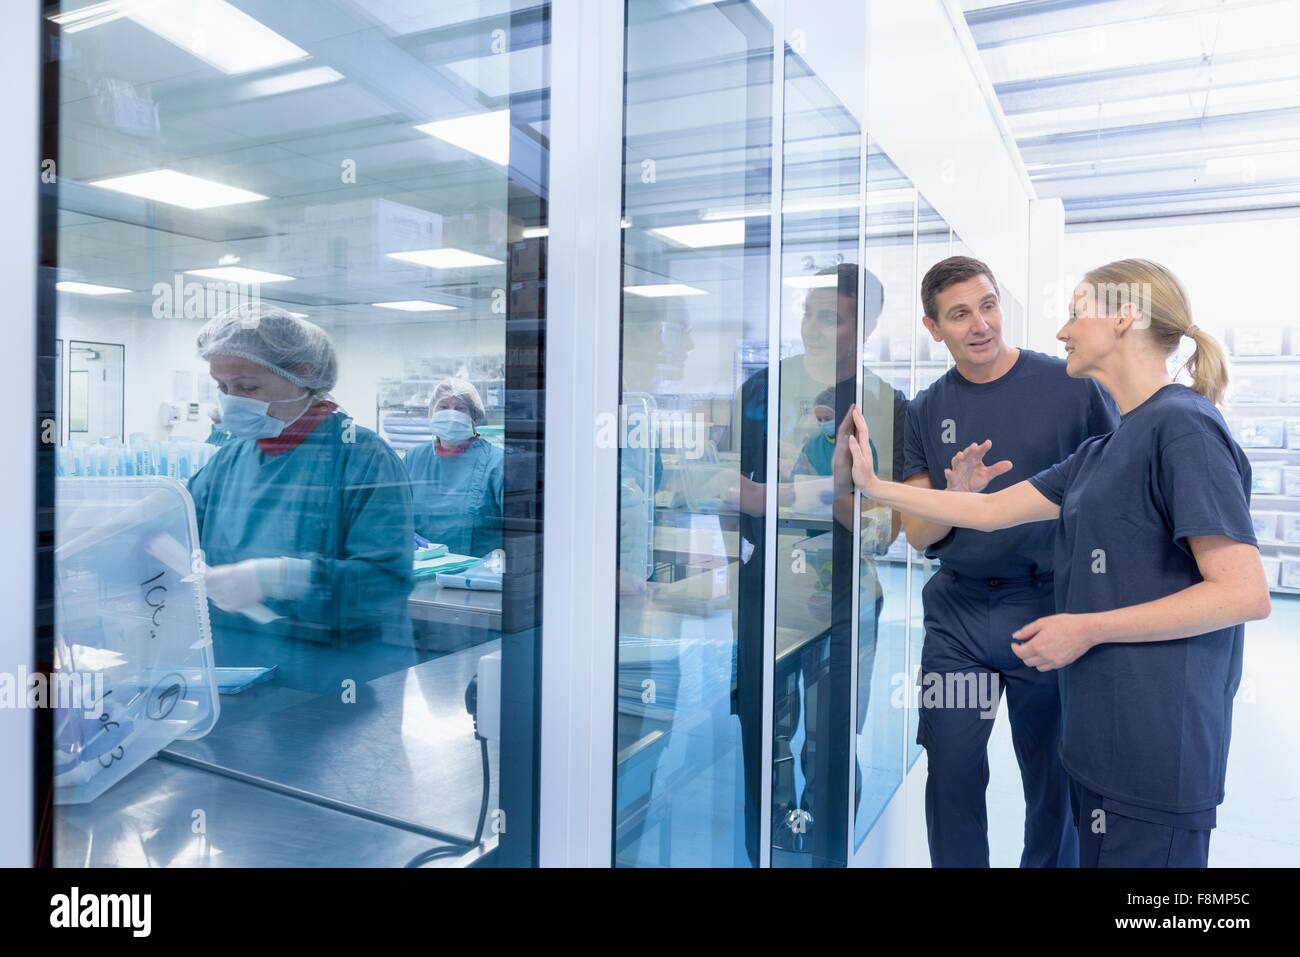 Workers in discussion outside clean room in surgical instrument factory Stock Photo